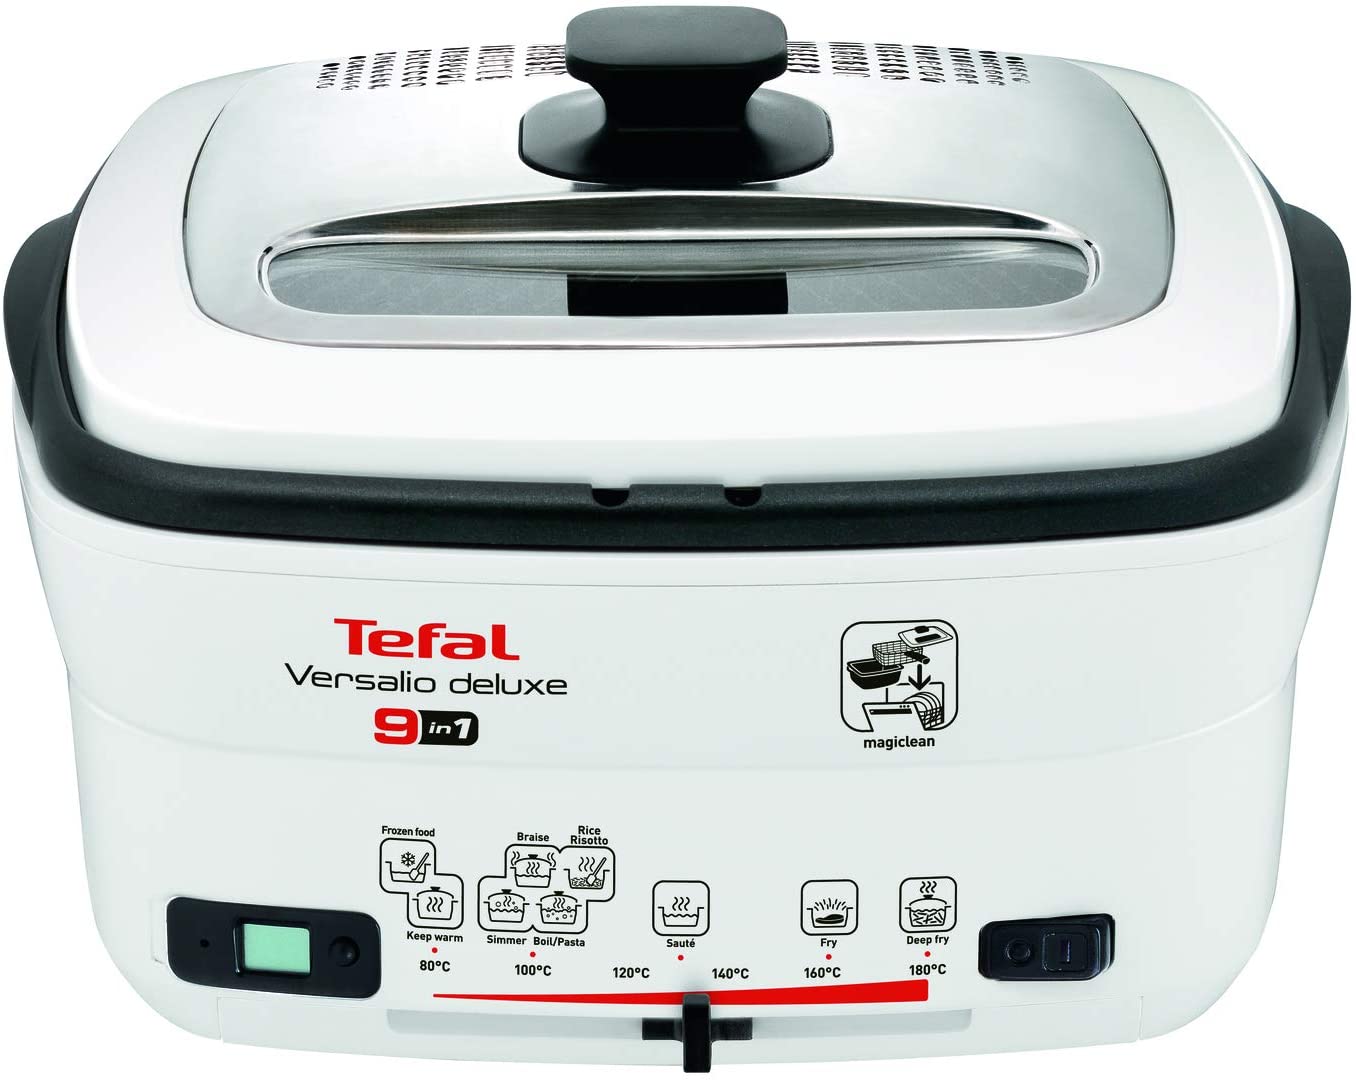 Tefal FR4950 Versalio Deluxe 9-in-1 Multi-Function Fryer | Capacity 1.3 kg | Includes Spatula | Roasting | Fry | Squeeze | Adjustable Temperature | Timer | White